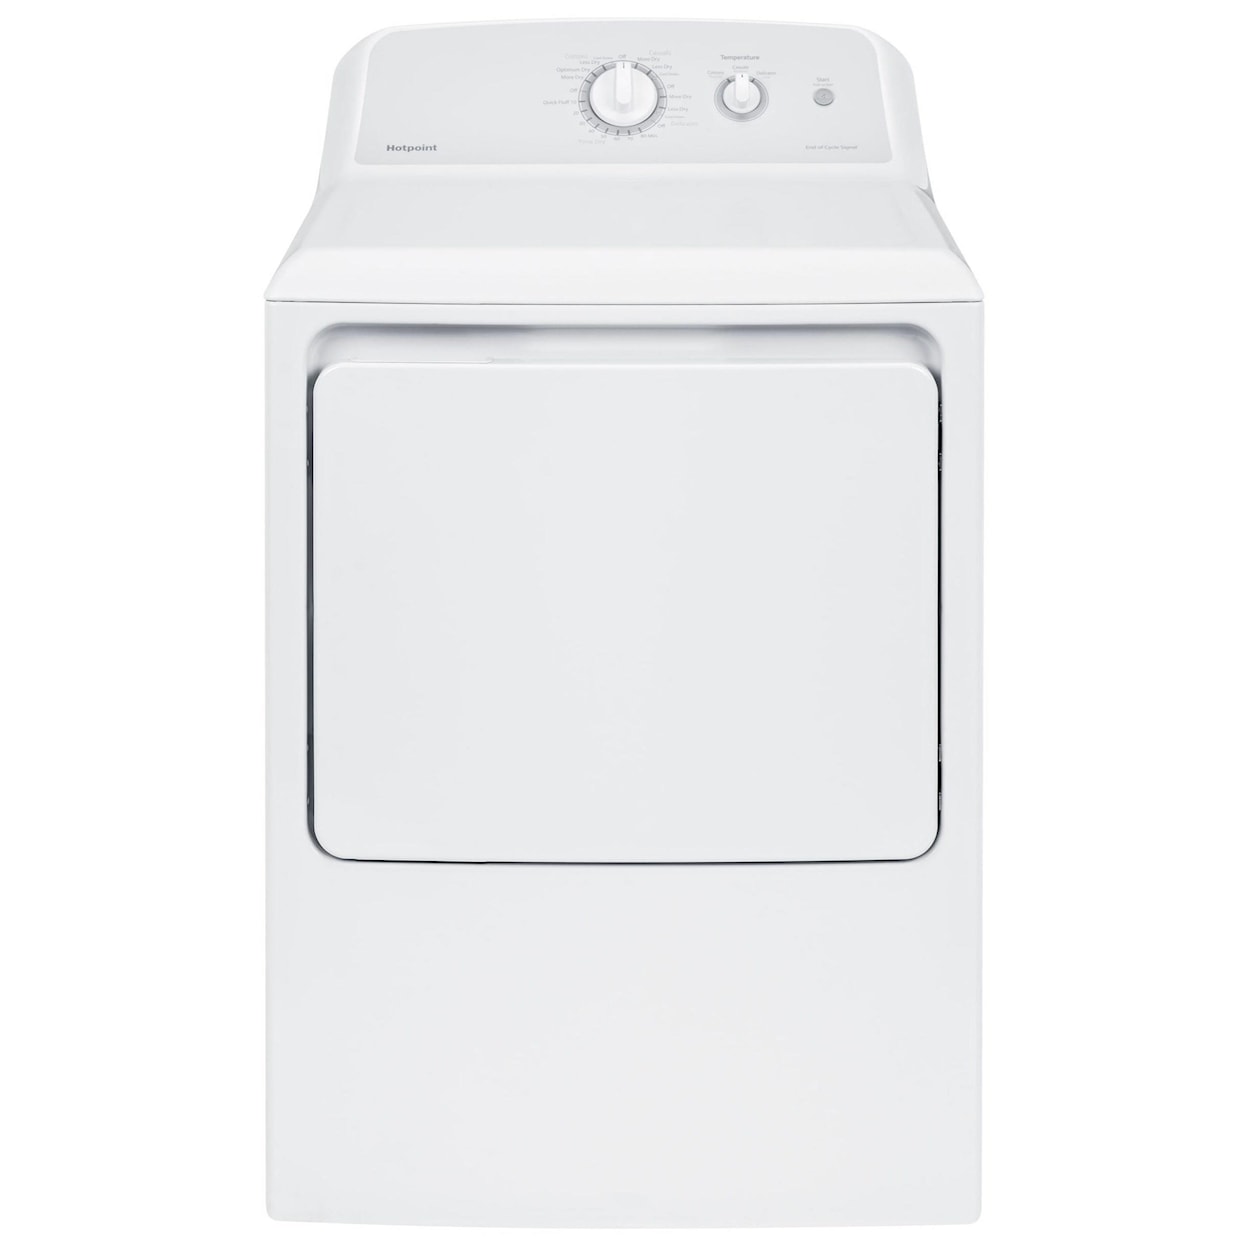 GE Appliances Hotpoint Home Laundry Hotpoint® 6.2 cu. ft. Electric Dryer